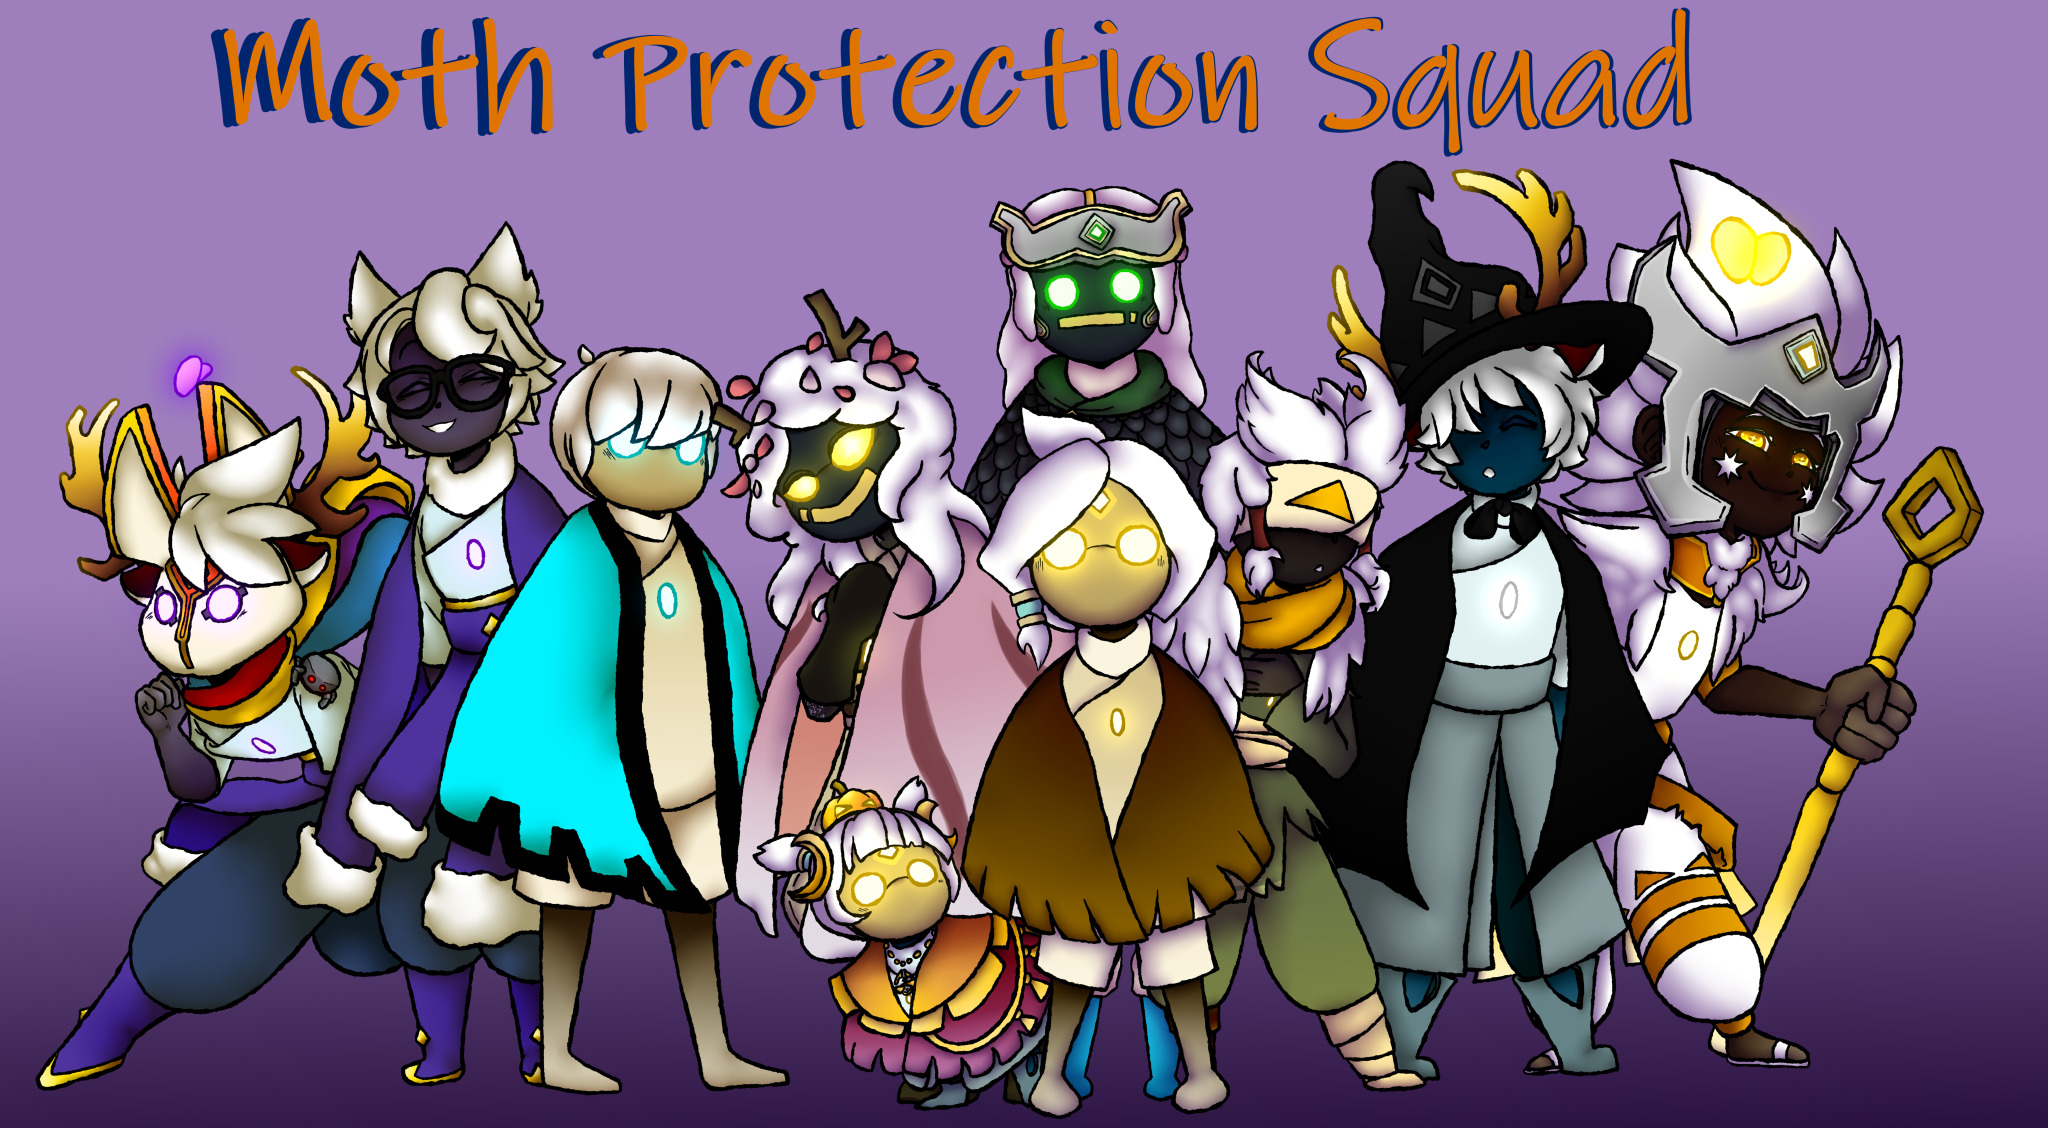 Moth Protection Squad - Finished!